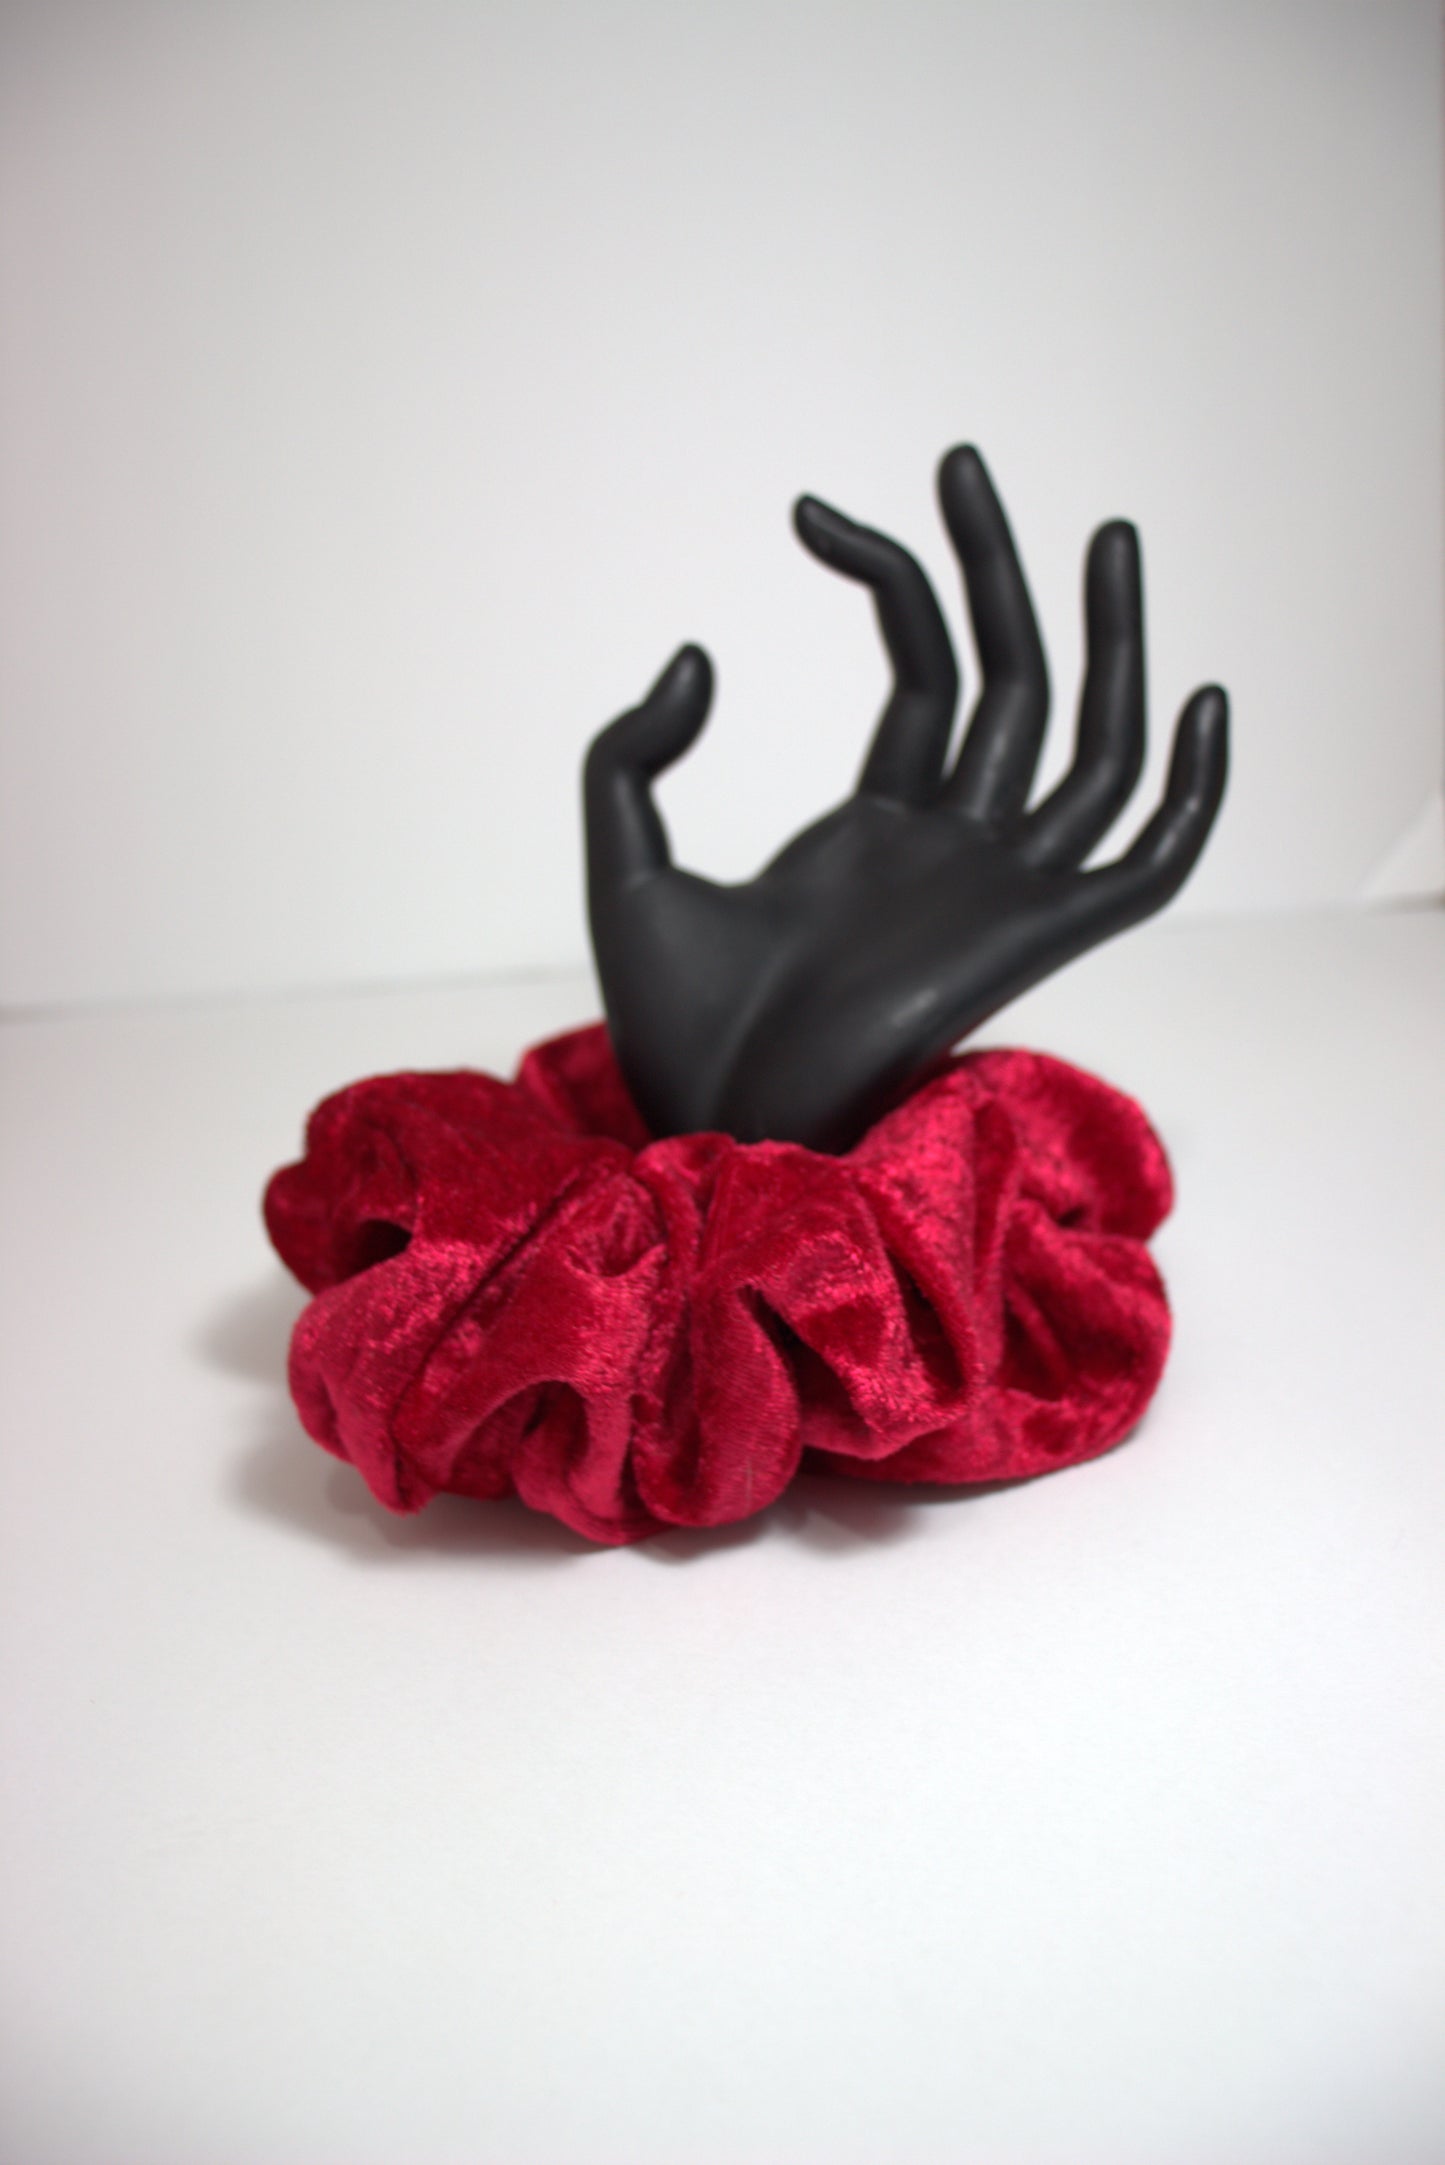 Introducing "Celeste," the epitome of sophistication and style in the form of a scrunchie. Handmade with precision and care, this red velour beauty is designed to elevate your hair game, offering a perfect blend of comfort and elegance.